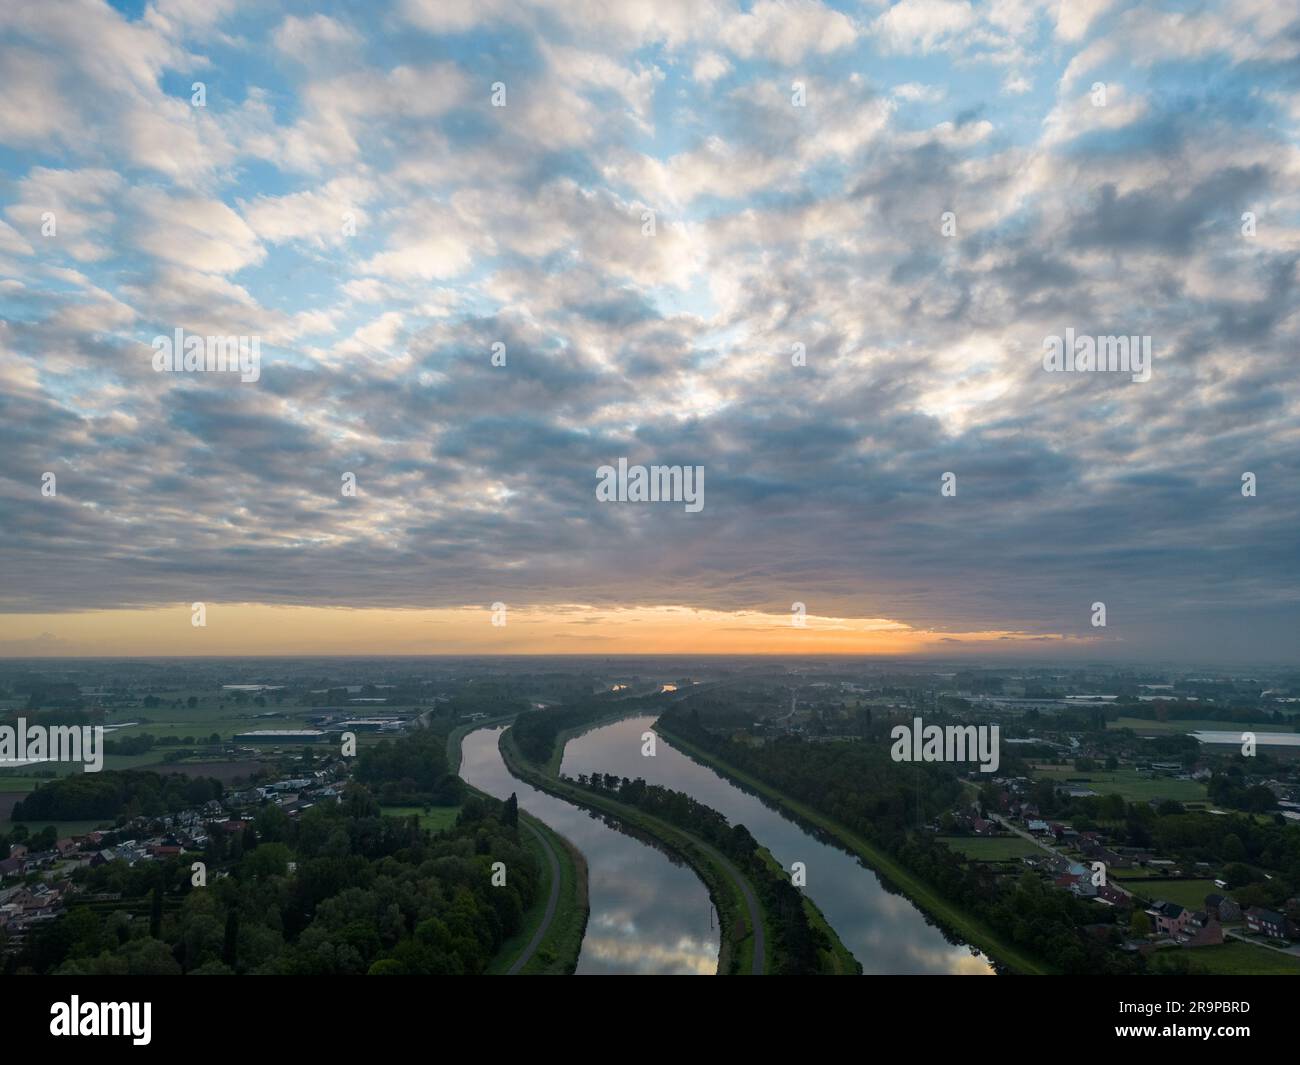 Aerial view of a colorful dramatic sunrise sky over the river Nete in Duffel, Belgium. River with water for transport, agriculture. Fields and meadows. River and forest landscape. High quality photo Stock Photo